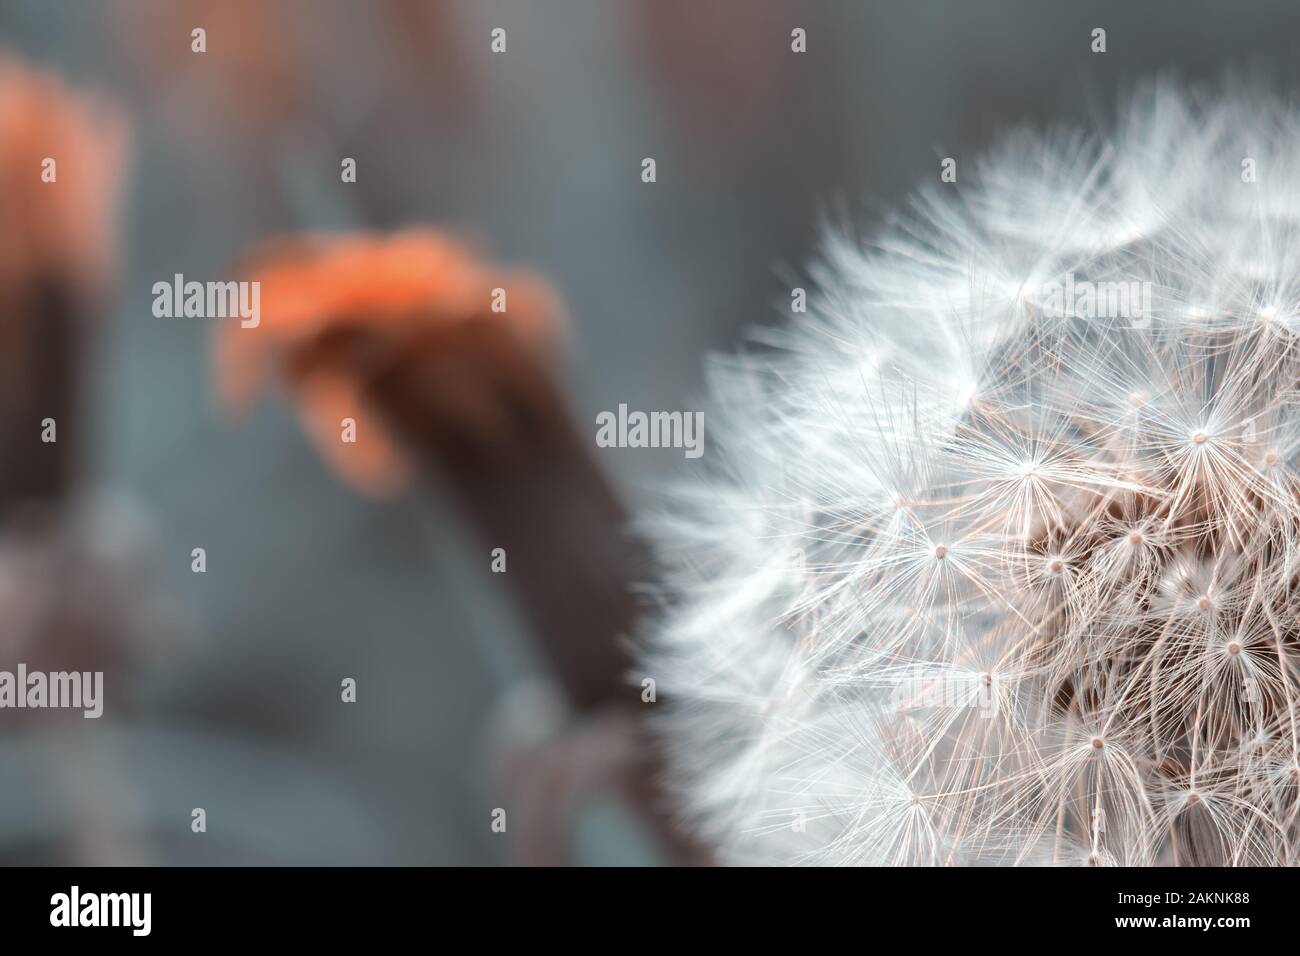 Dandelion flower seedhead closeup with sunlight and blue pale sky background. Stock Photo